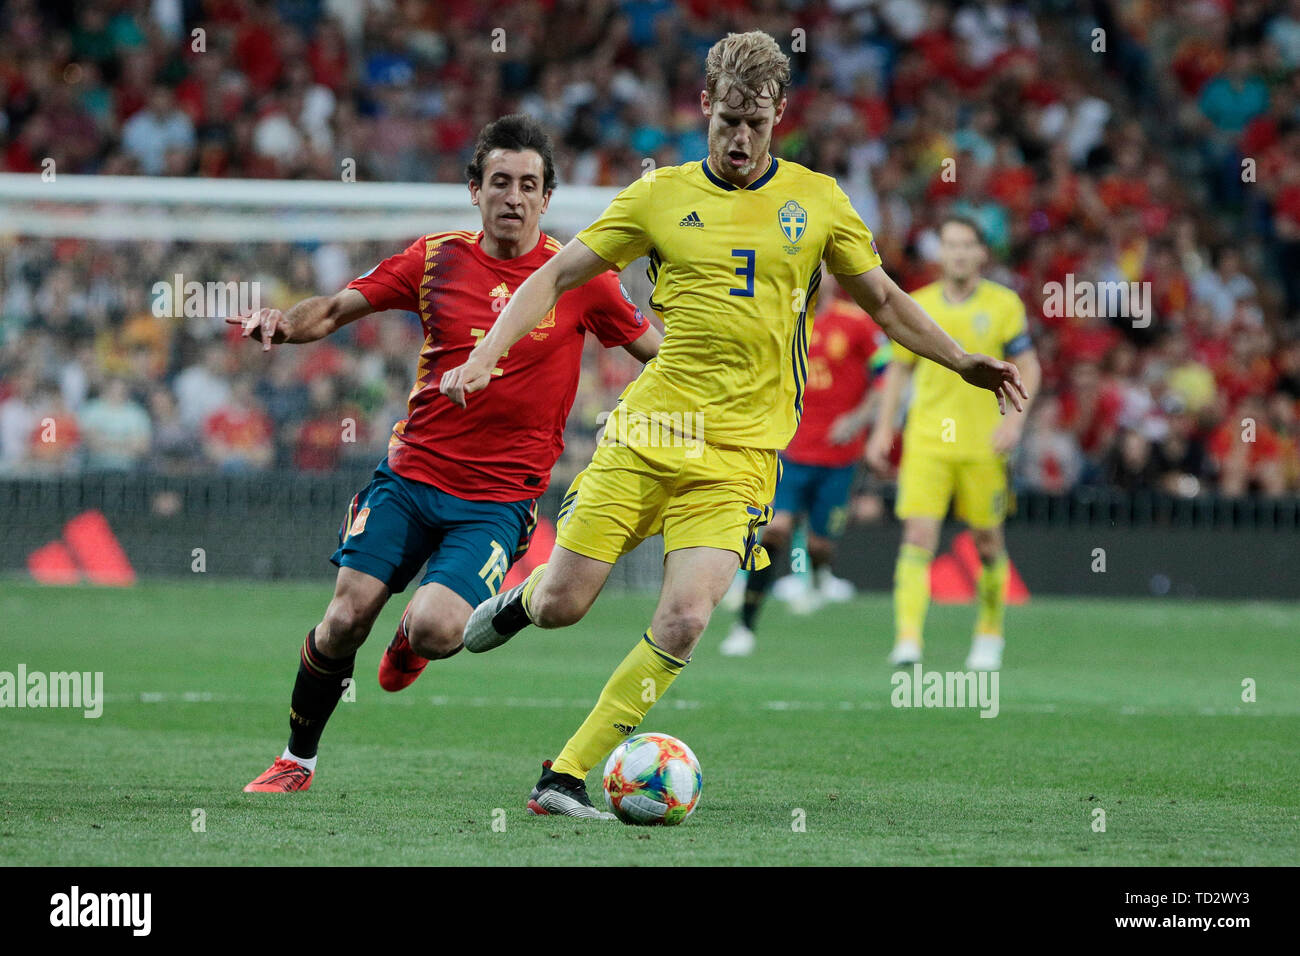 Spain national team player Mikel Oyarzabal and Sweden national team player Filip Helander seen in action during the UEFA EURO 2020 Qualifier match between Spain and Sweden at Santiago Bernabeu Stadium in Madrid. Final score: Spain 3 - Sweden 0 Stock Photo